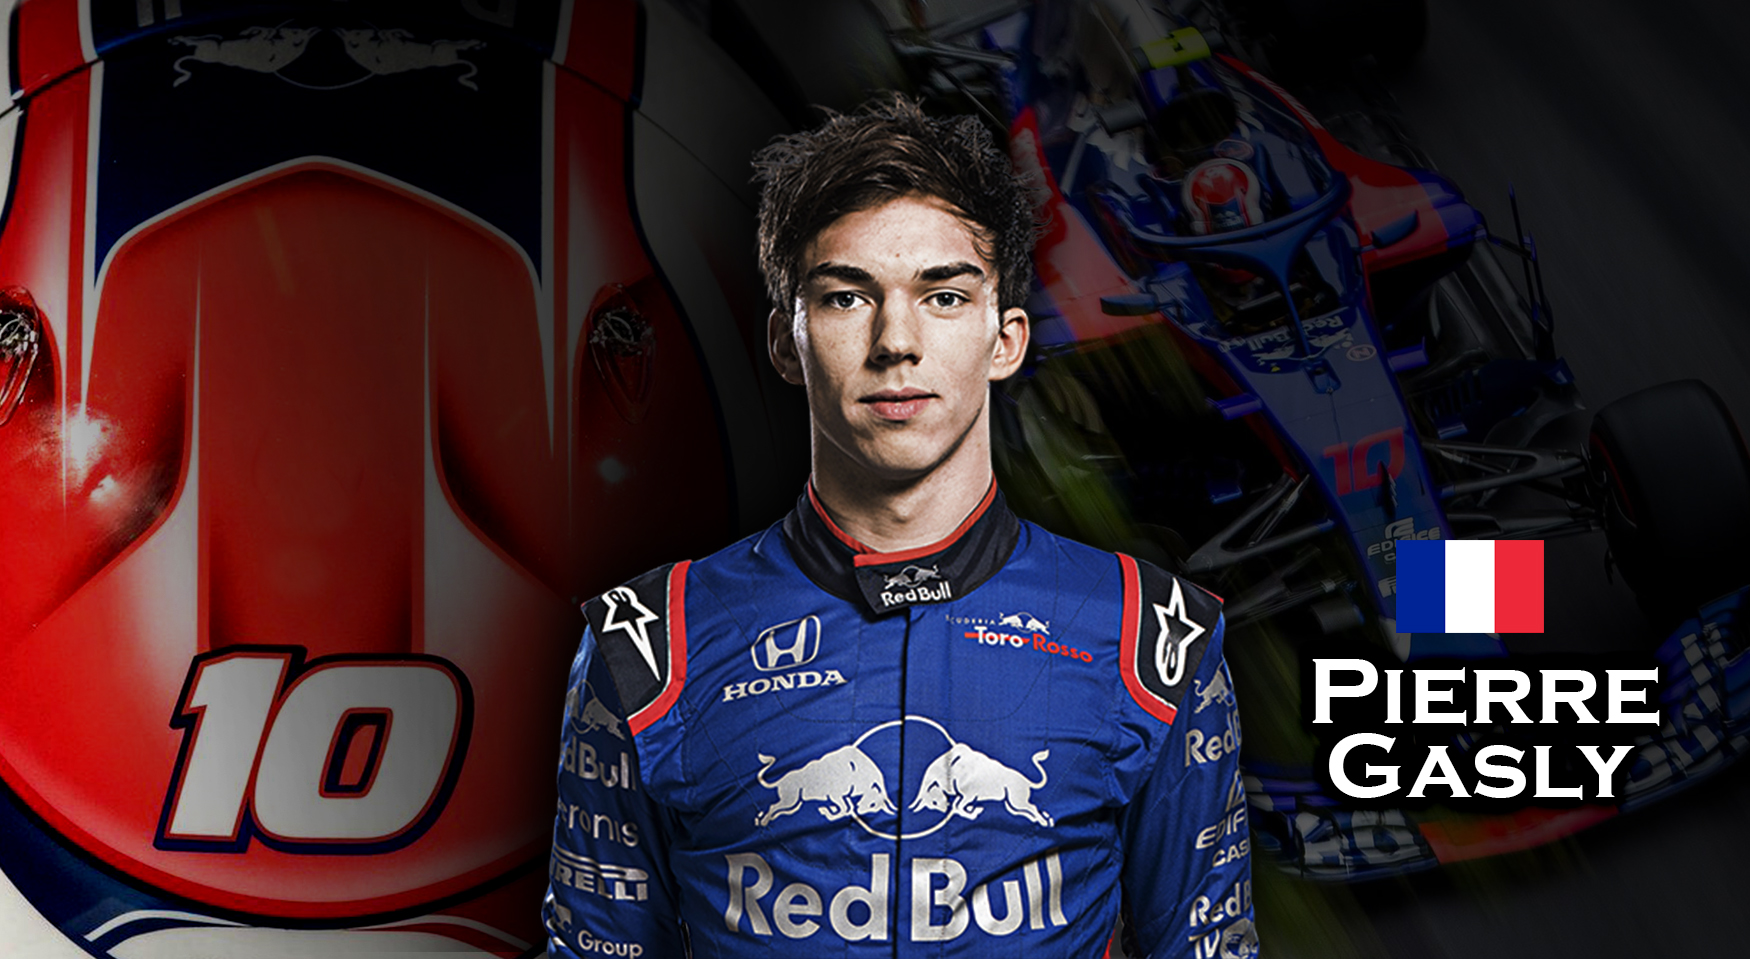 Pierre gasly is a french racing driver